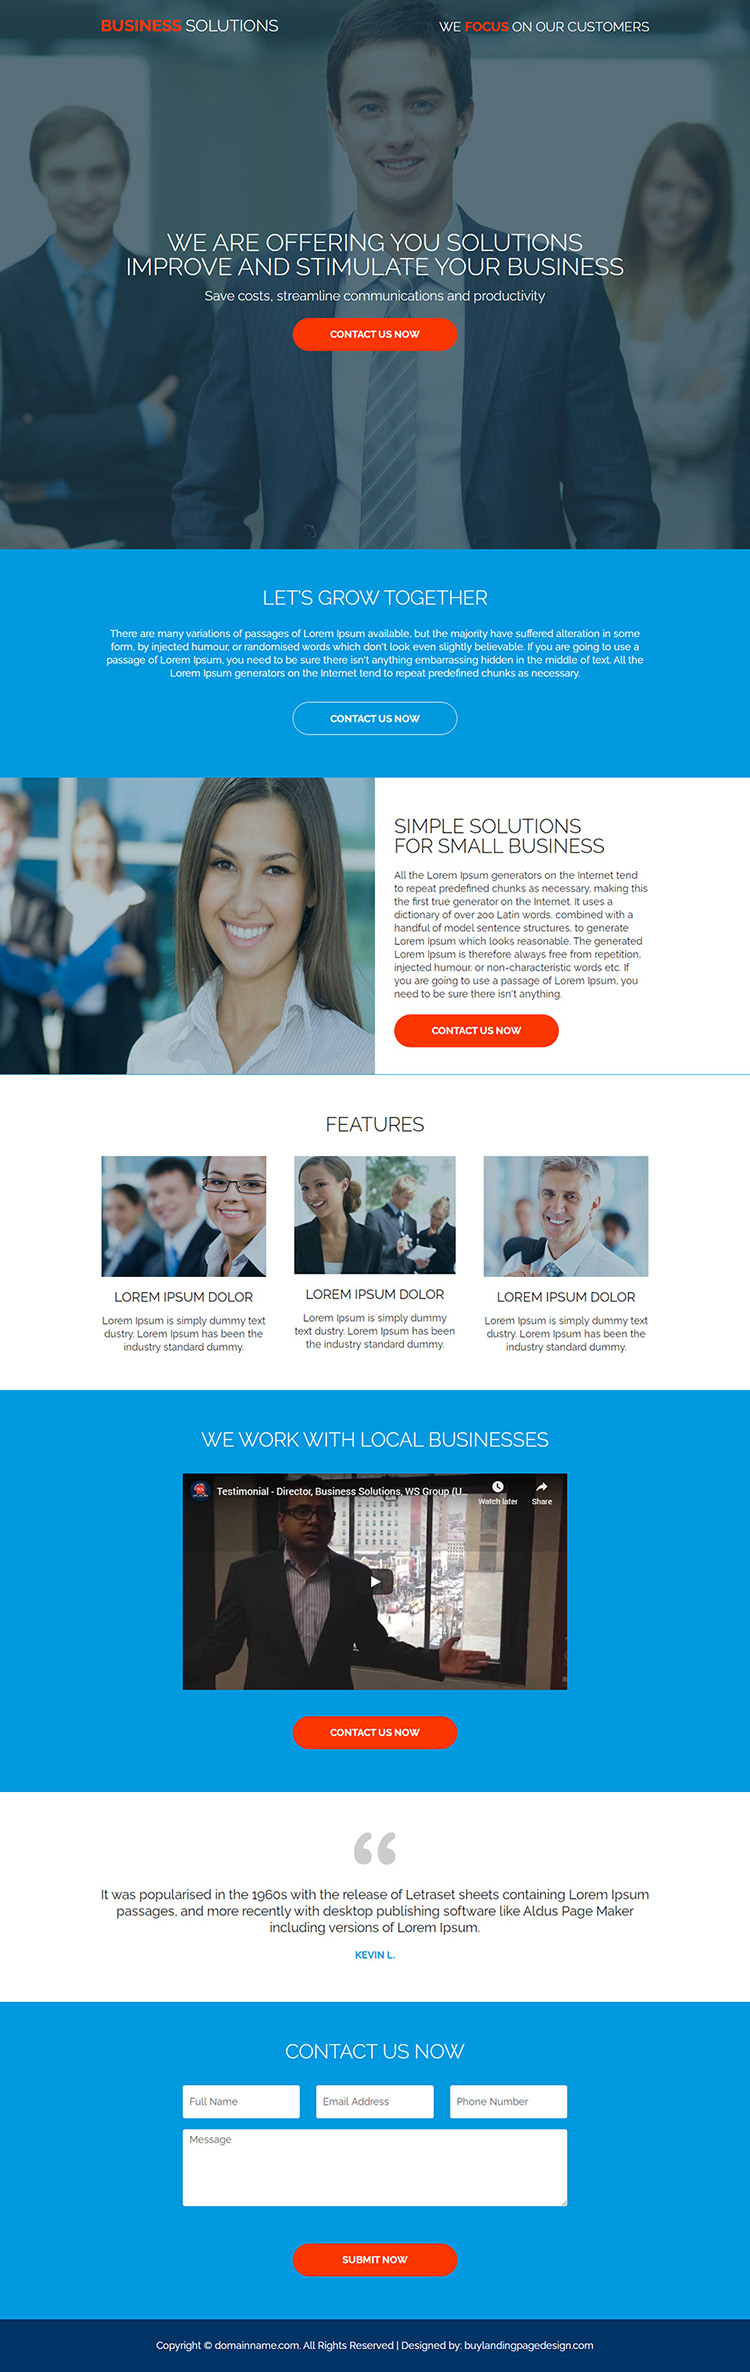 small business solutions responsive landing page designs